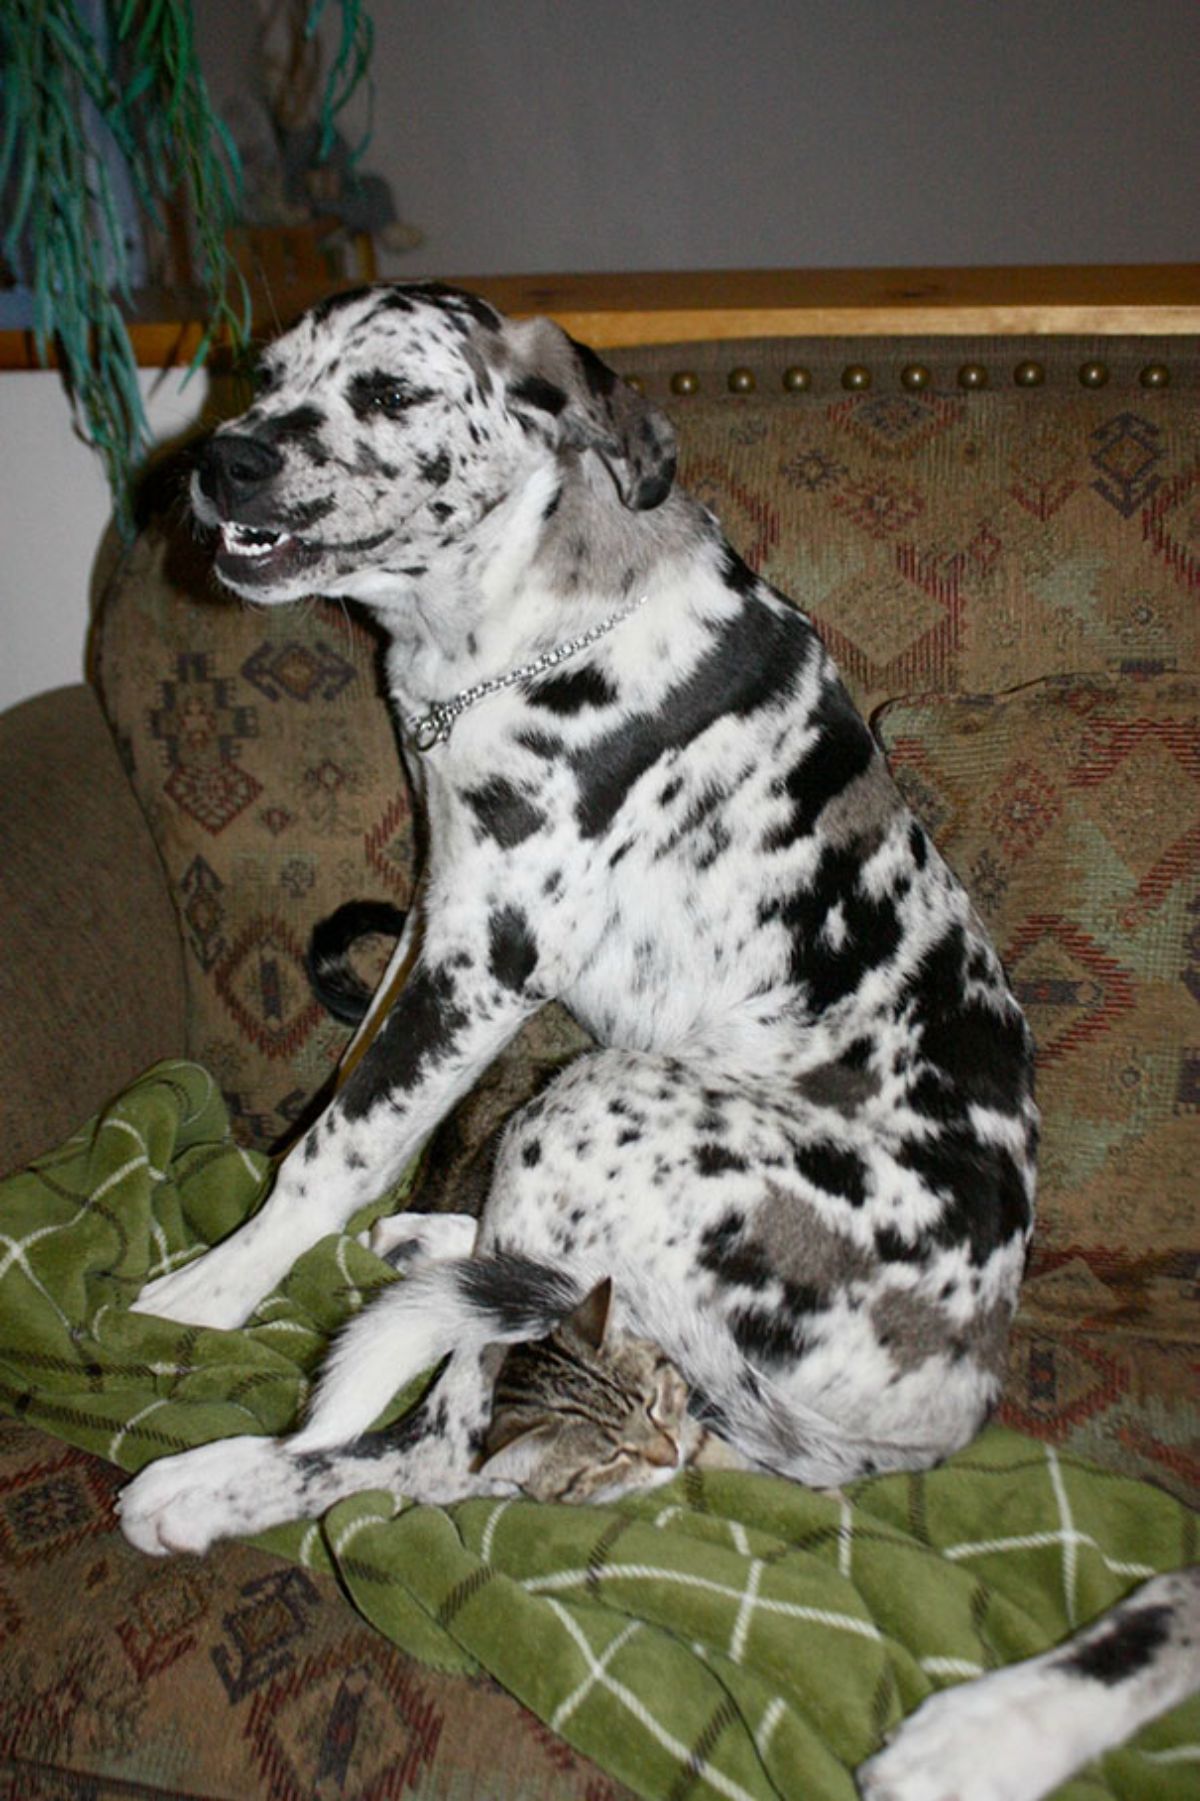 black and white dog sitting on a grey tabby cat laying on a green blanket on a brown sofa